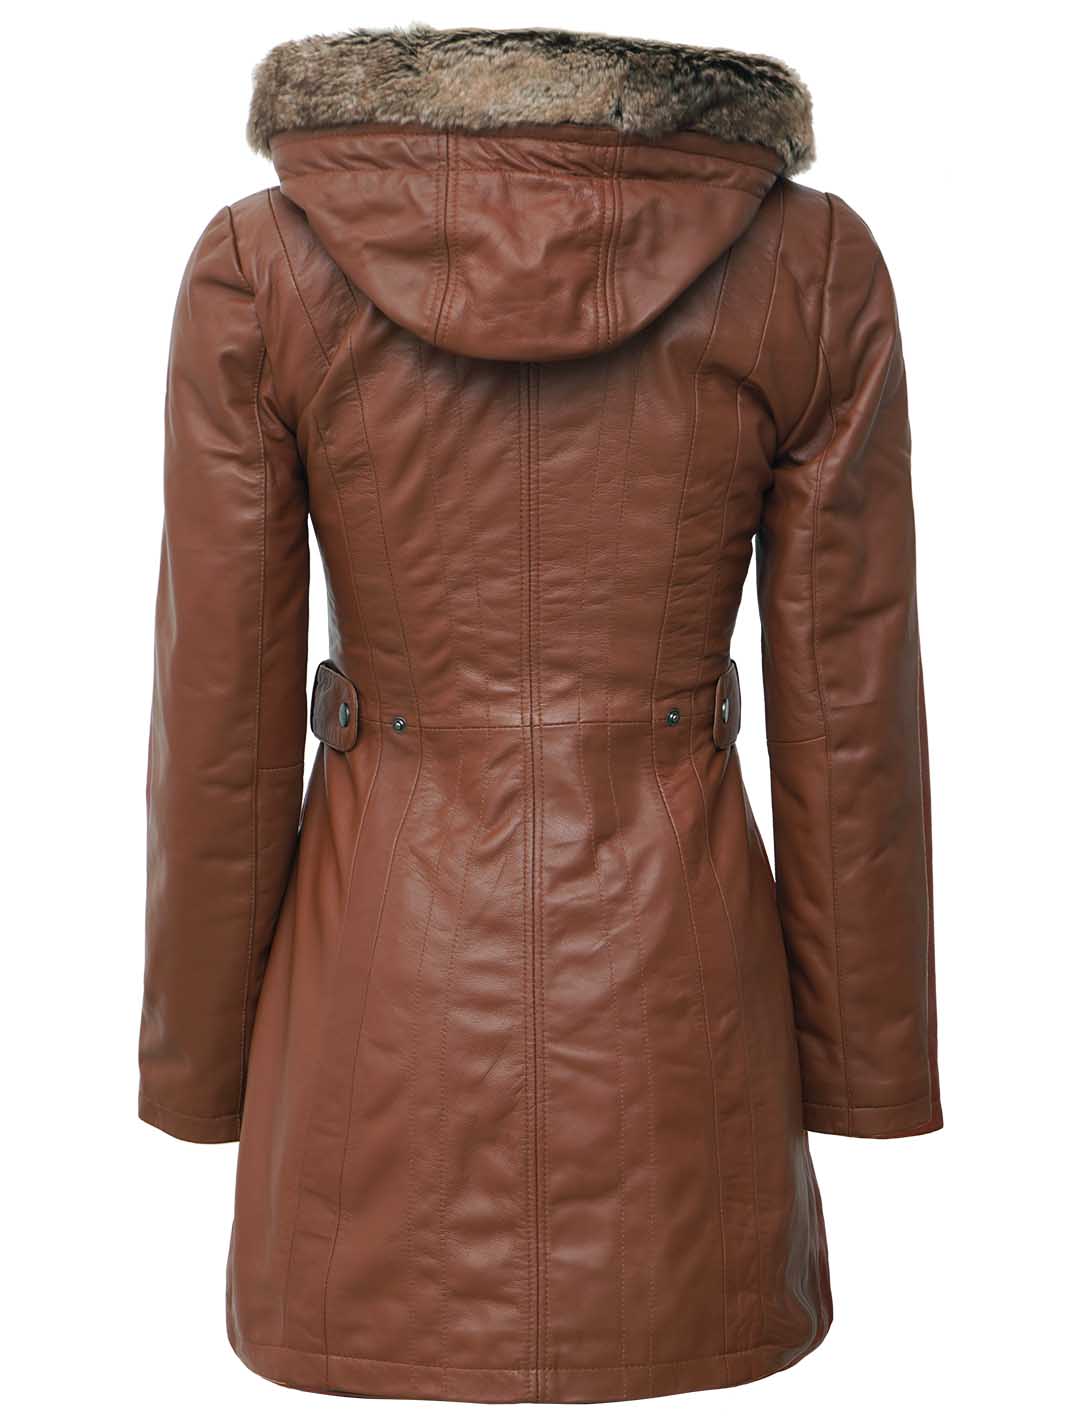 Brown Jean Shearling Leather Coat Womens